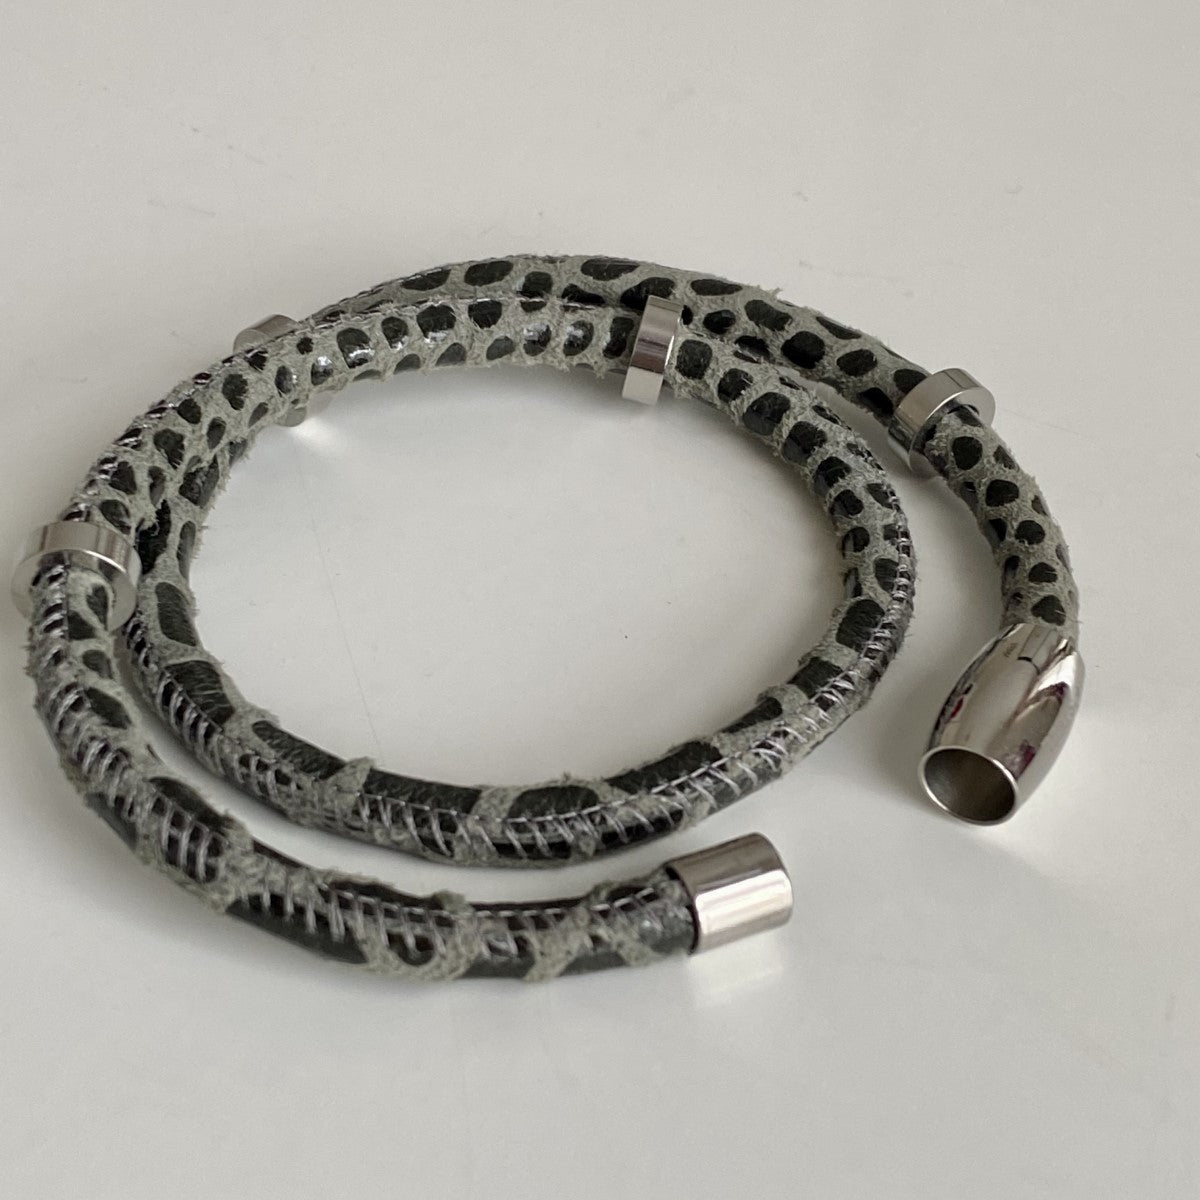 Grey Textured Leather Double Men's Bracelet with a Magnetic Stainless Steel Clasp and Spacers